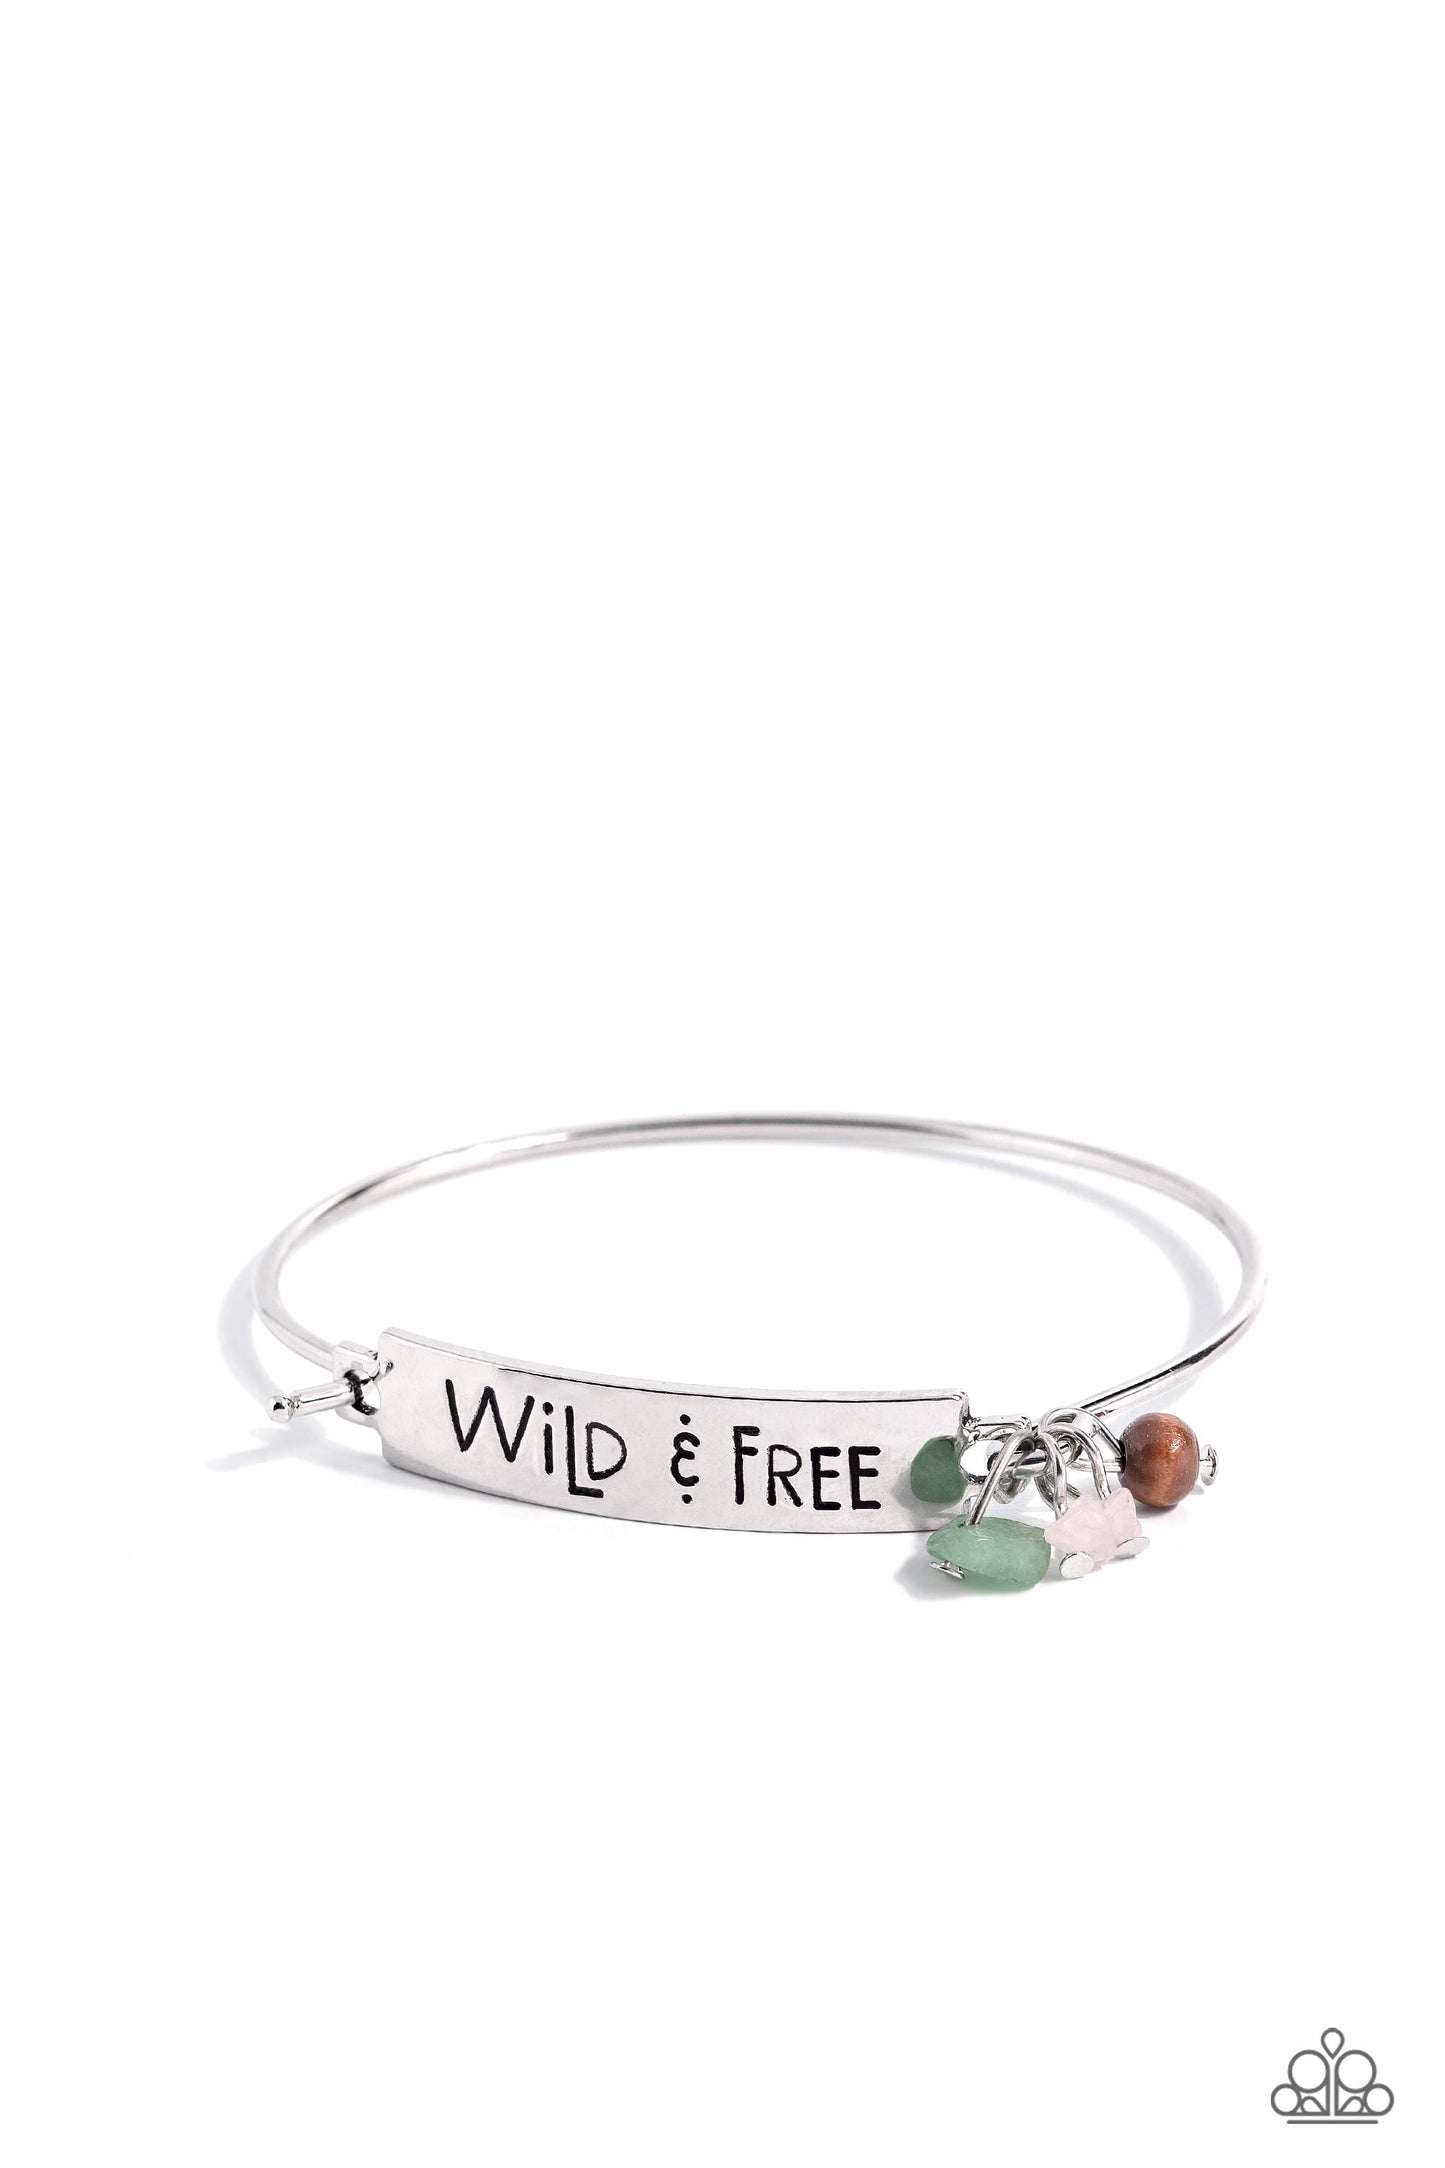 Fearless Fashionista - Pink and Green Stone Wild & Free Inspirational Bangle Bracelet